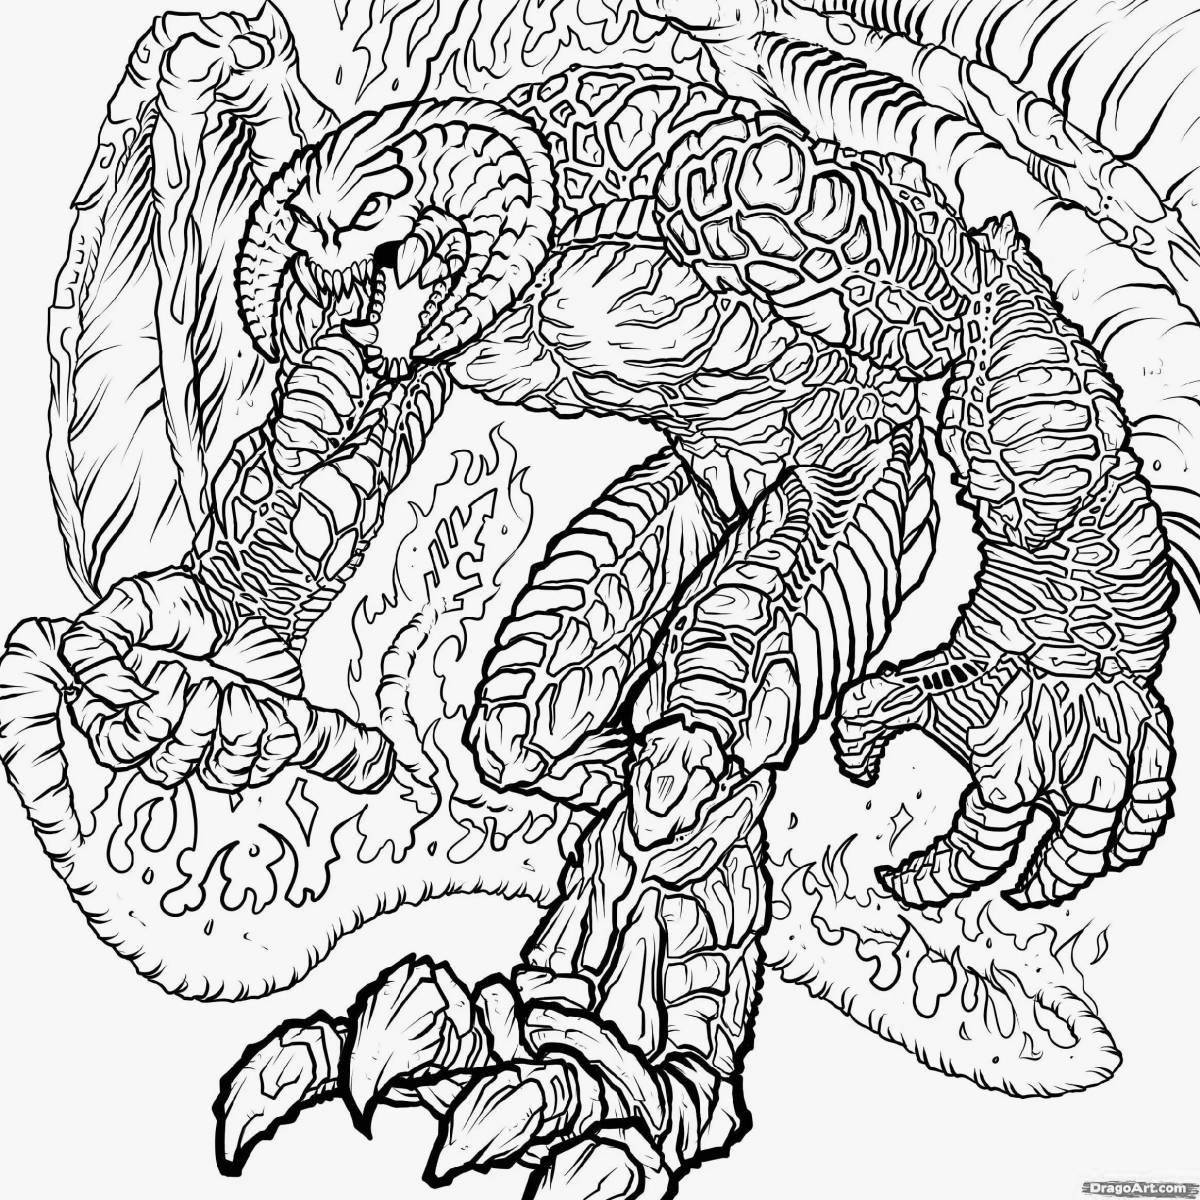 Naughty blue monster coloring page